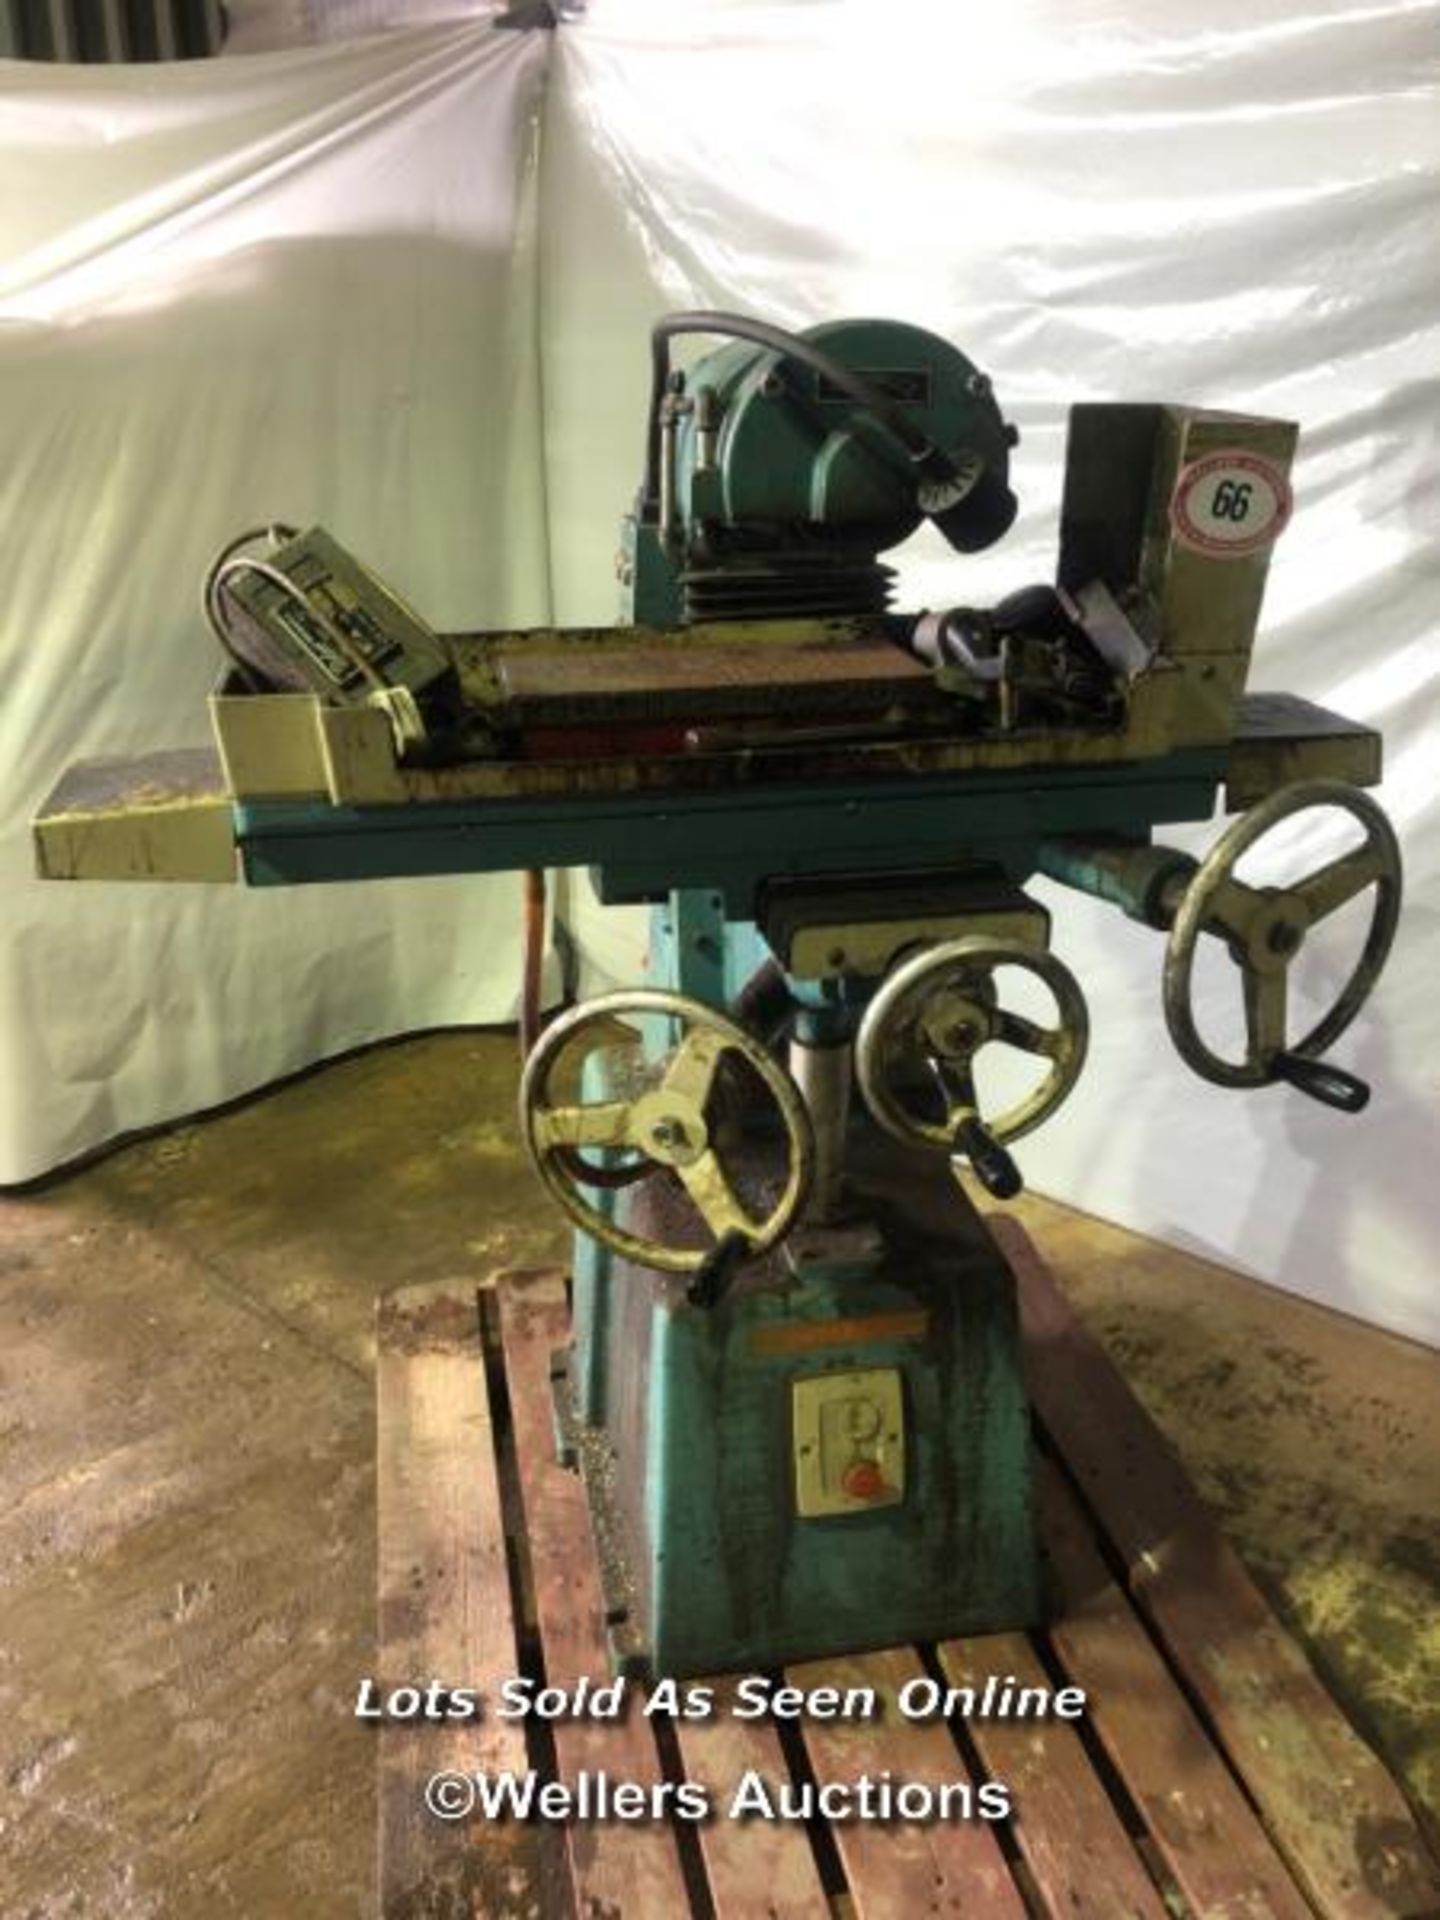 VICTAEAGLE SURFACE GRINDER, COMPLETE WITH DIAMOND DRESSER AND HERBERT DIE HEAD SHARPENERS, IN